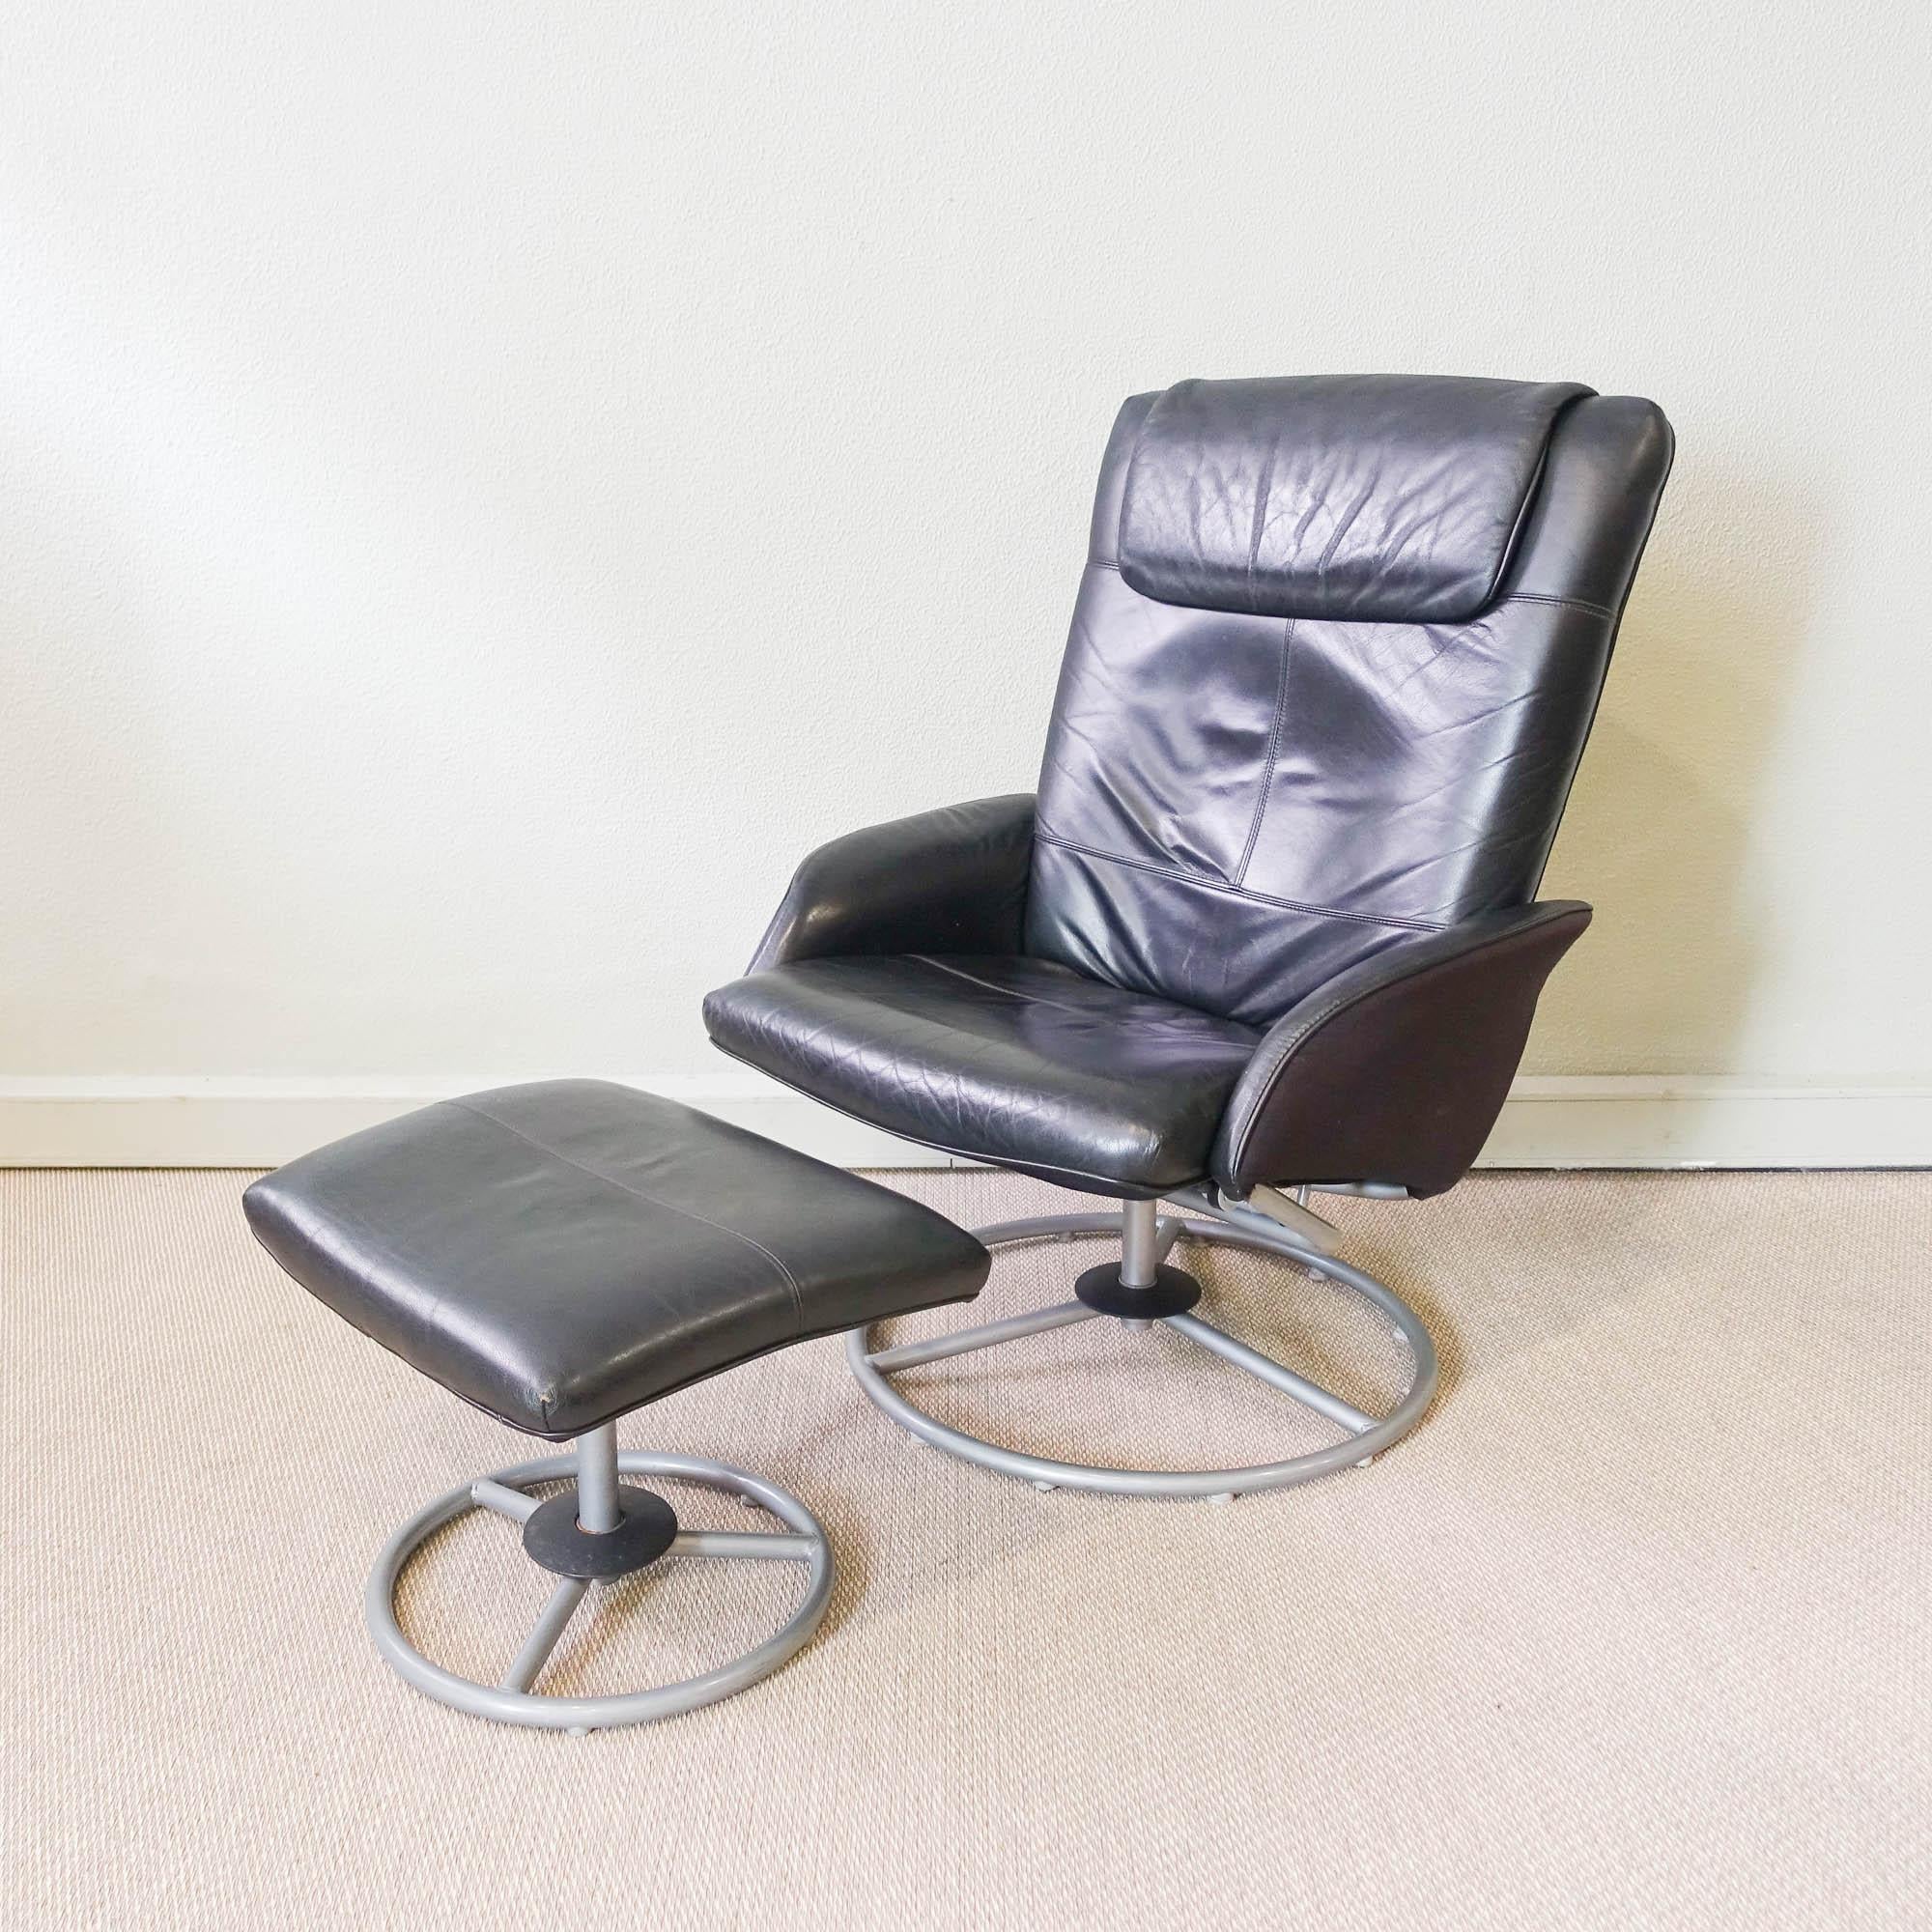 The 'Malung' recliner was designed and produced by Ikea in 1999. The chair and footstool have a circular metal base and are upholstered with a skai in black color. The back of the chair can be reclined. Used, but still in good condition, they